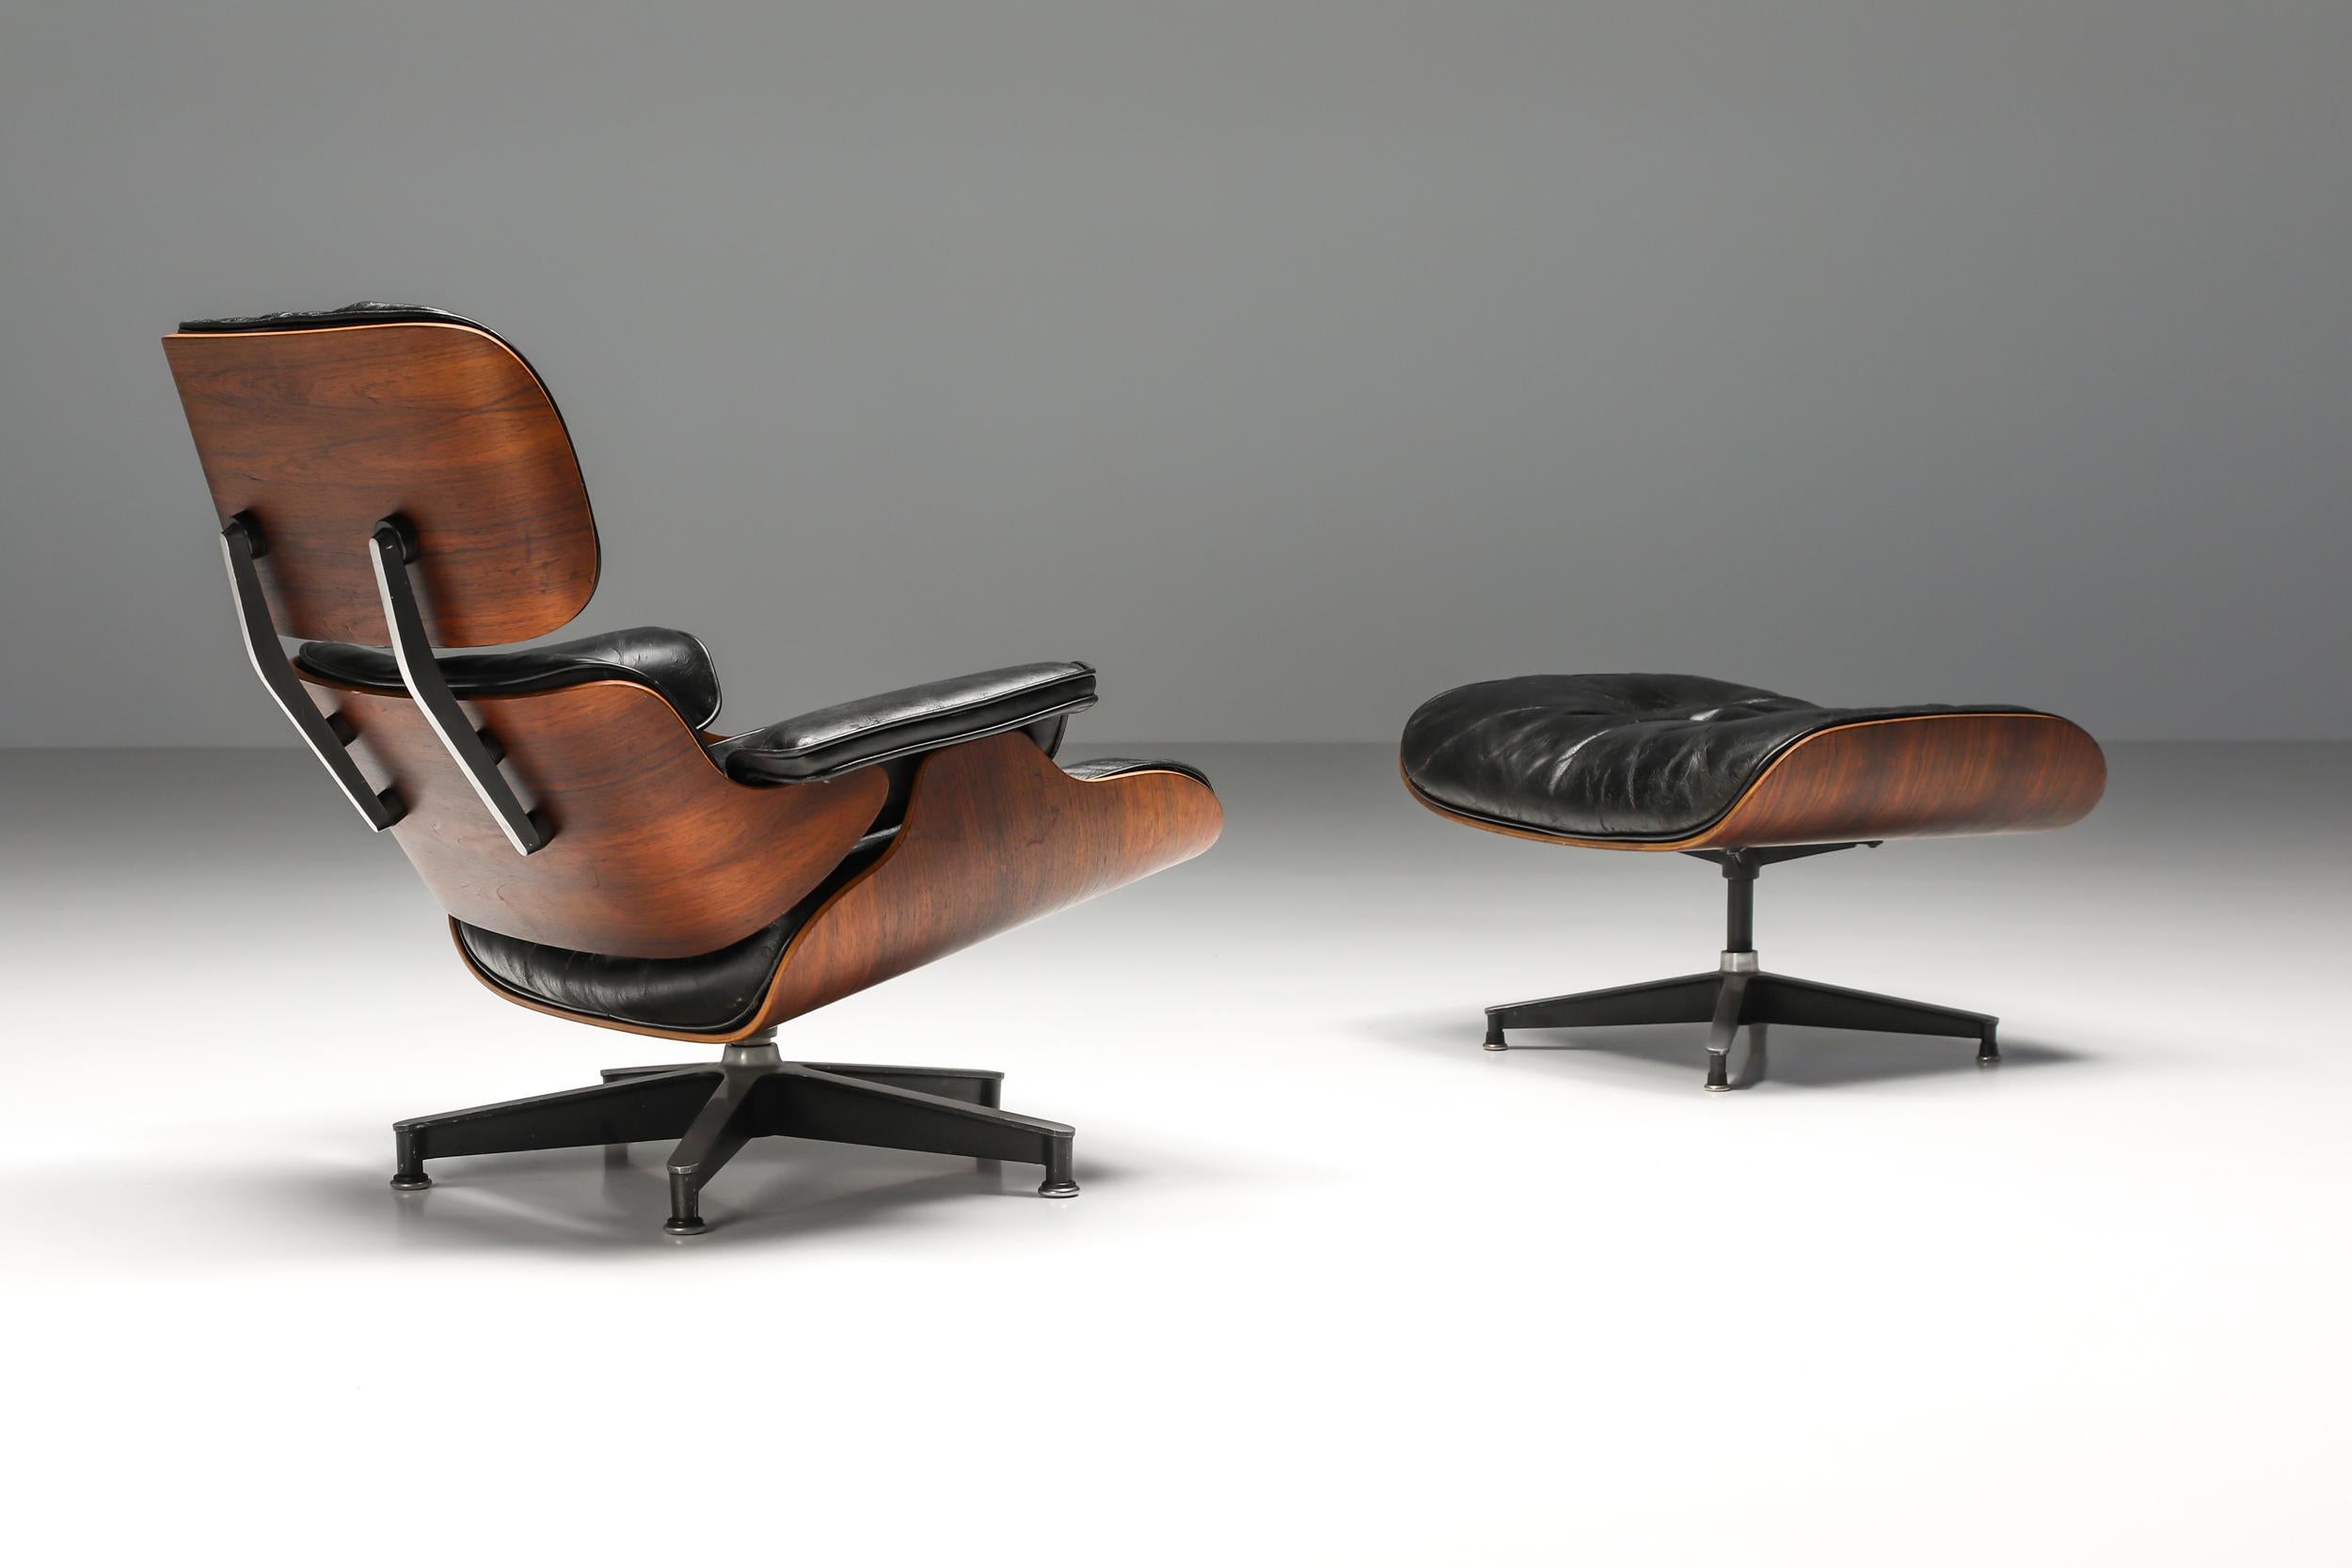 Eames; Herman Miller; Charles & Ray Eames; Mid-Century Modern, Lounge Chair with Ottoman; Iconic Design; Historical furniture; Collector's item; Design classic; Herman Miller Collection; 1957

Eames lounge chair & ottoman by Herman Miller dating